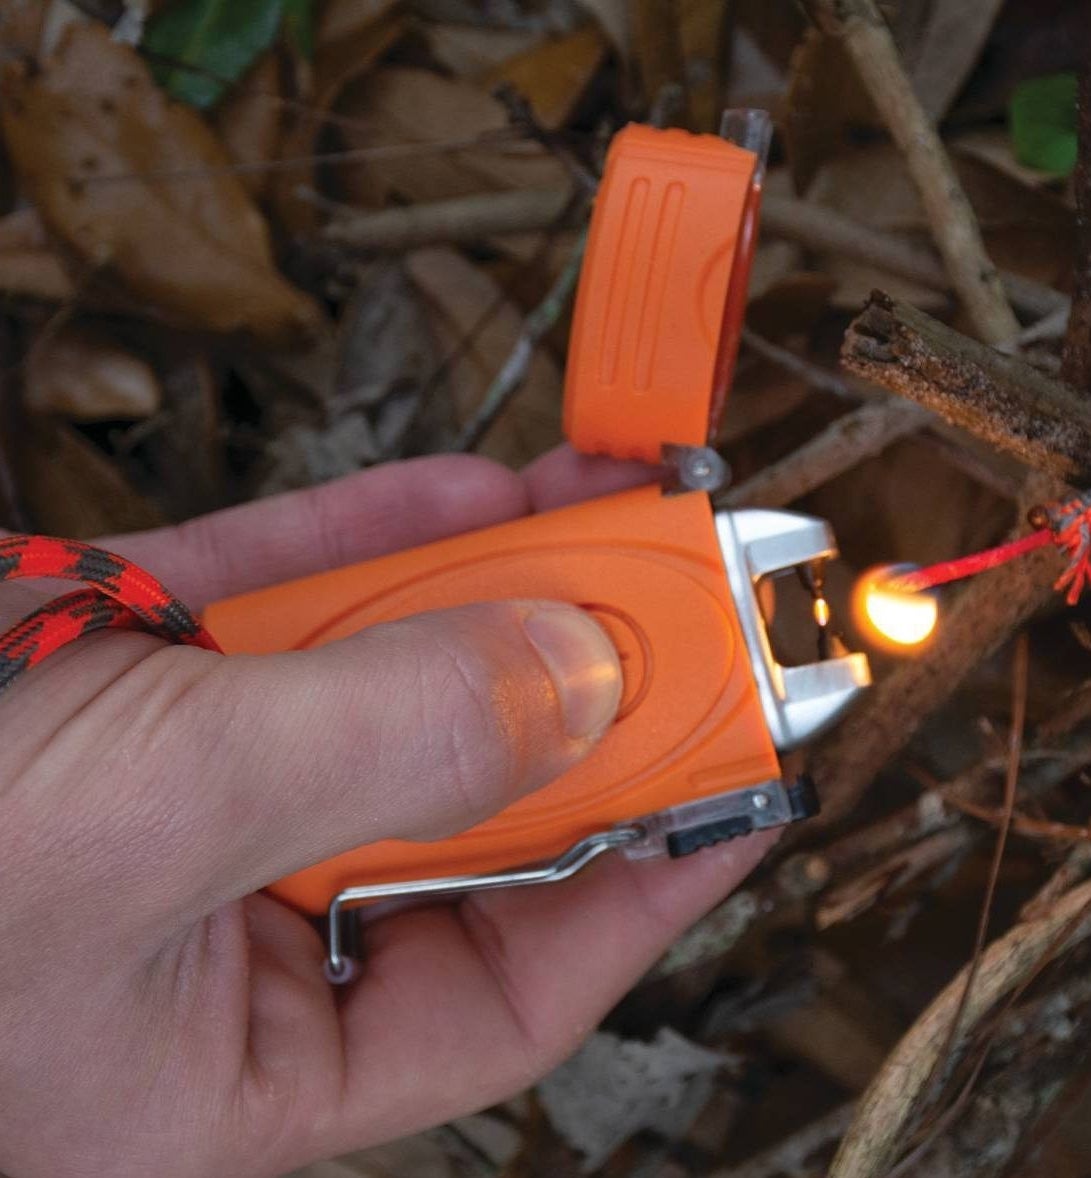 The fuel-free electric lighter